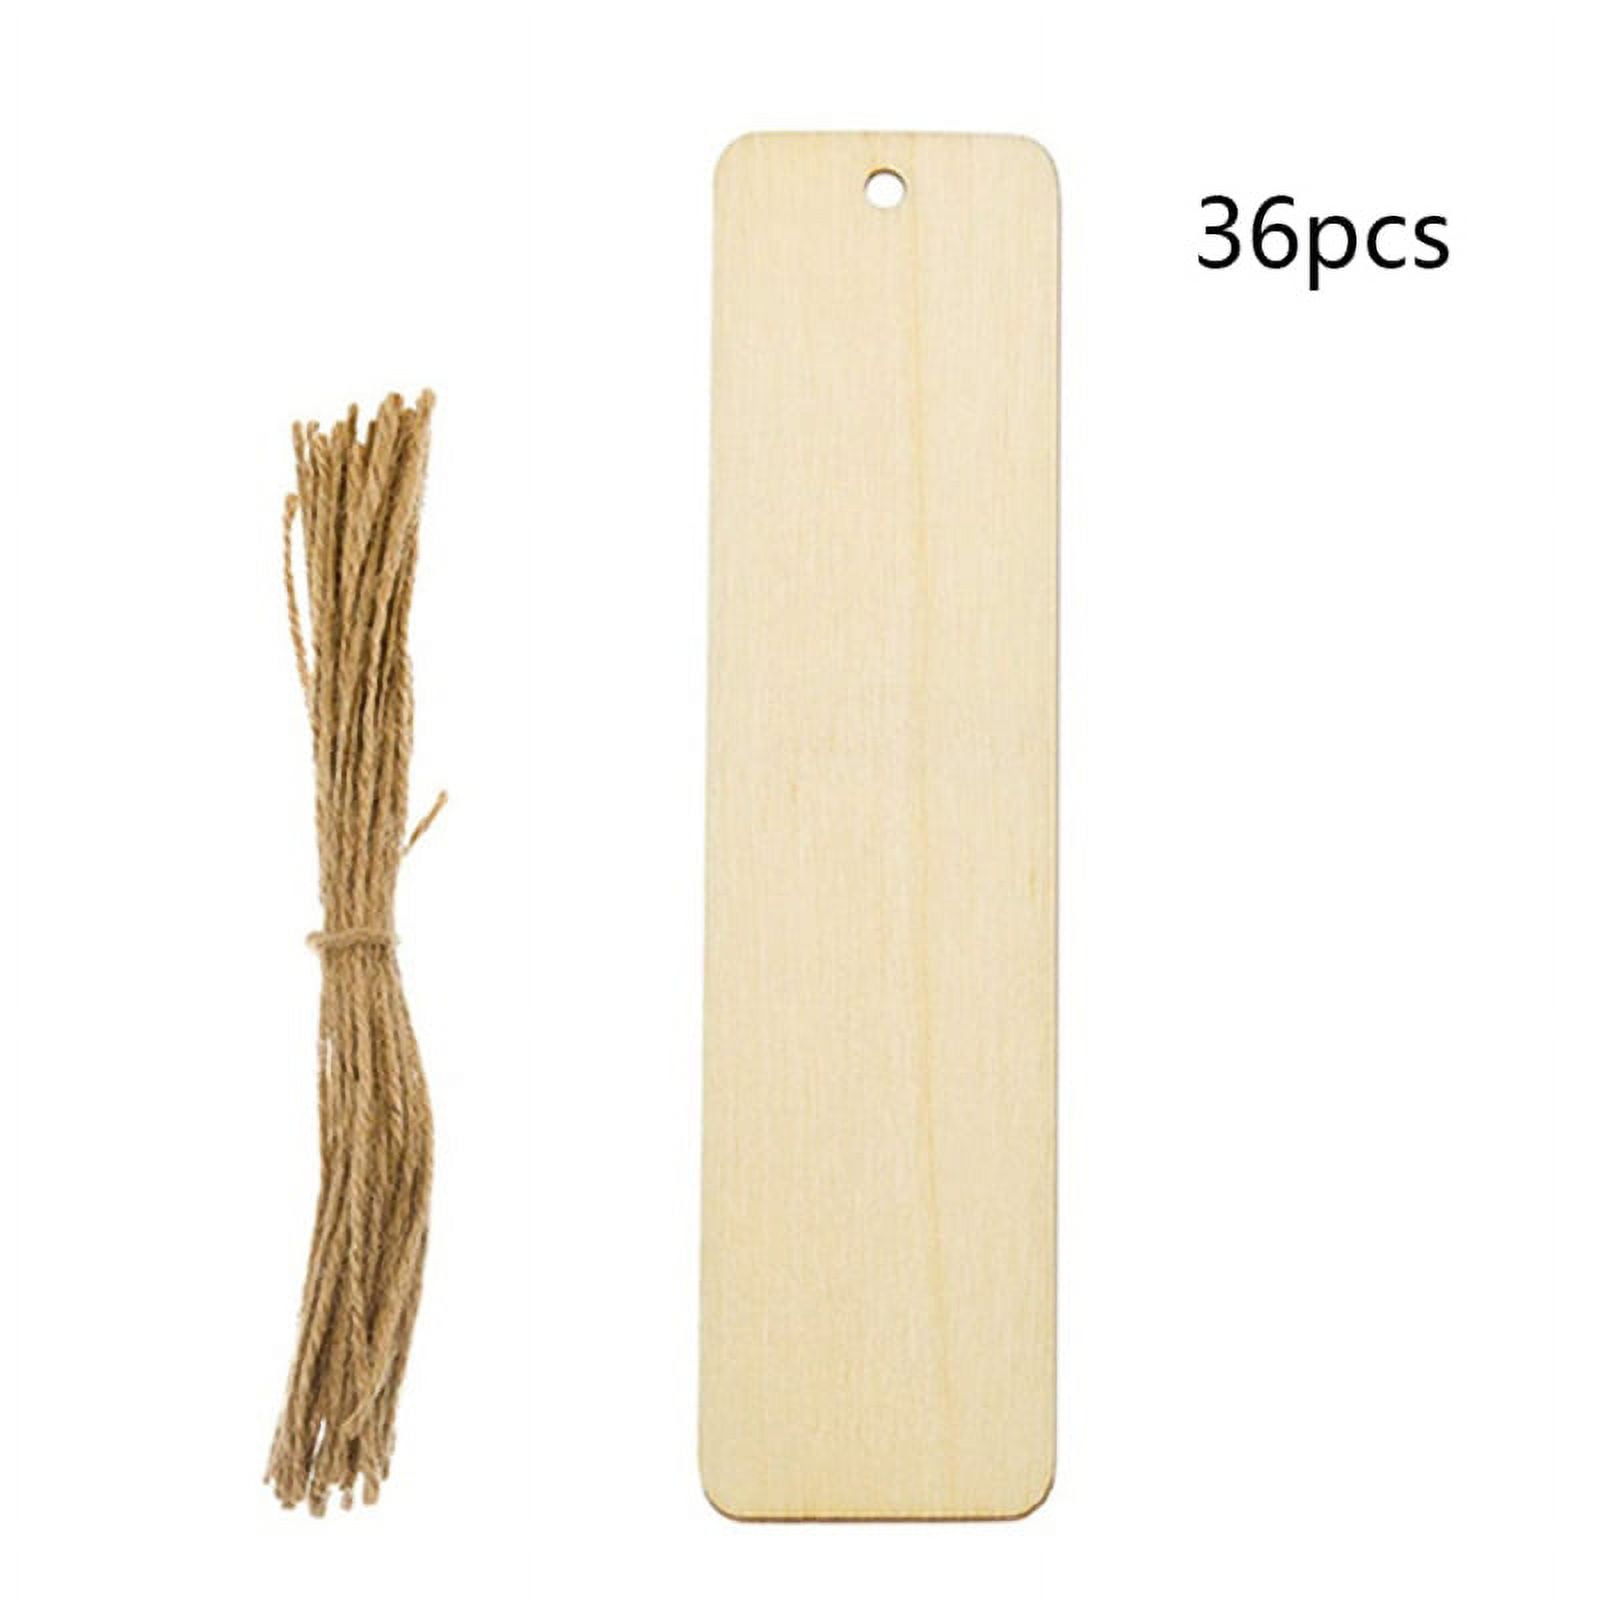 Wood Bookmark Bulk Blank Bookmarks with Ropes Wooden Book Markers Rectangle  Thin Hanging Tag with Holes for DIY 5/10/20/36pcs